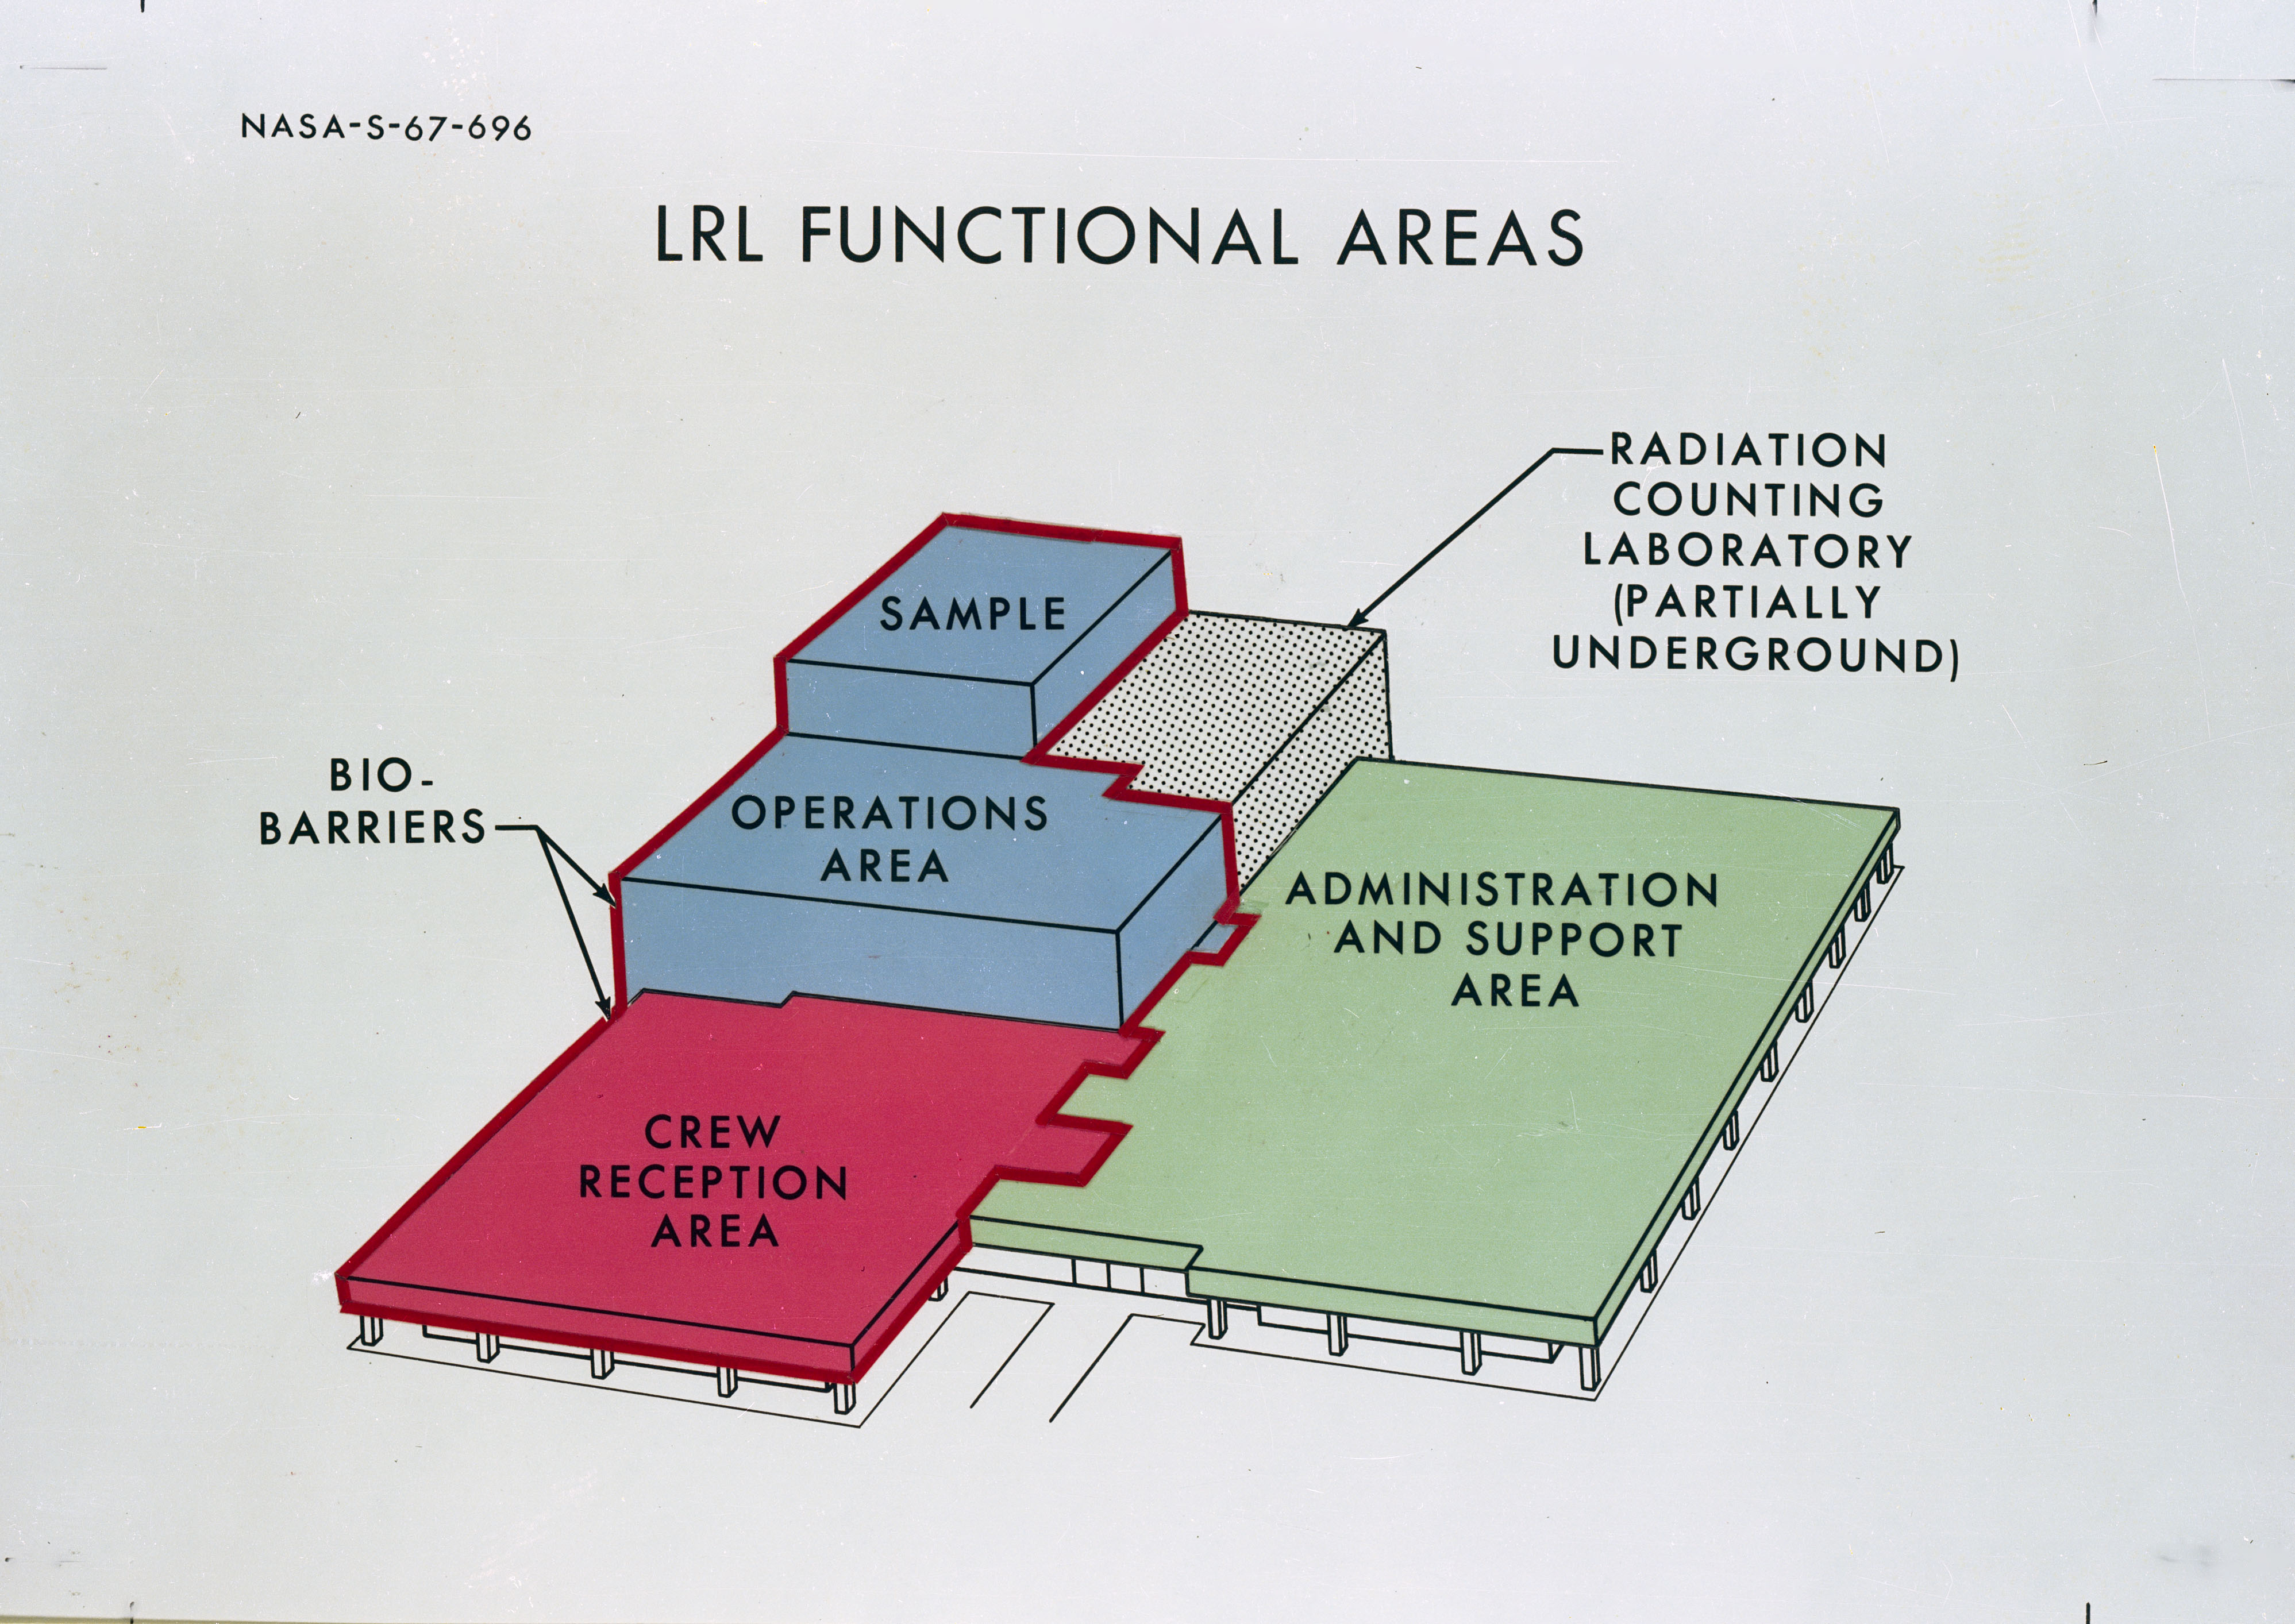 Schematic of the Lunar Receiving Laboratory (LRL) showing its major functional areas